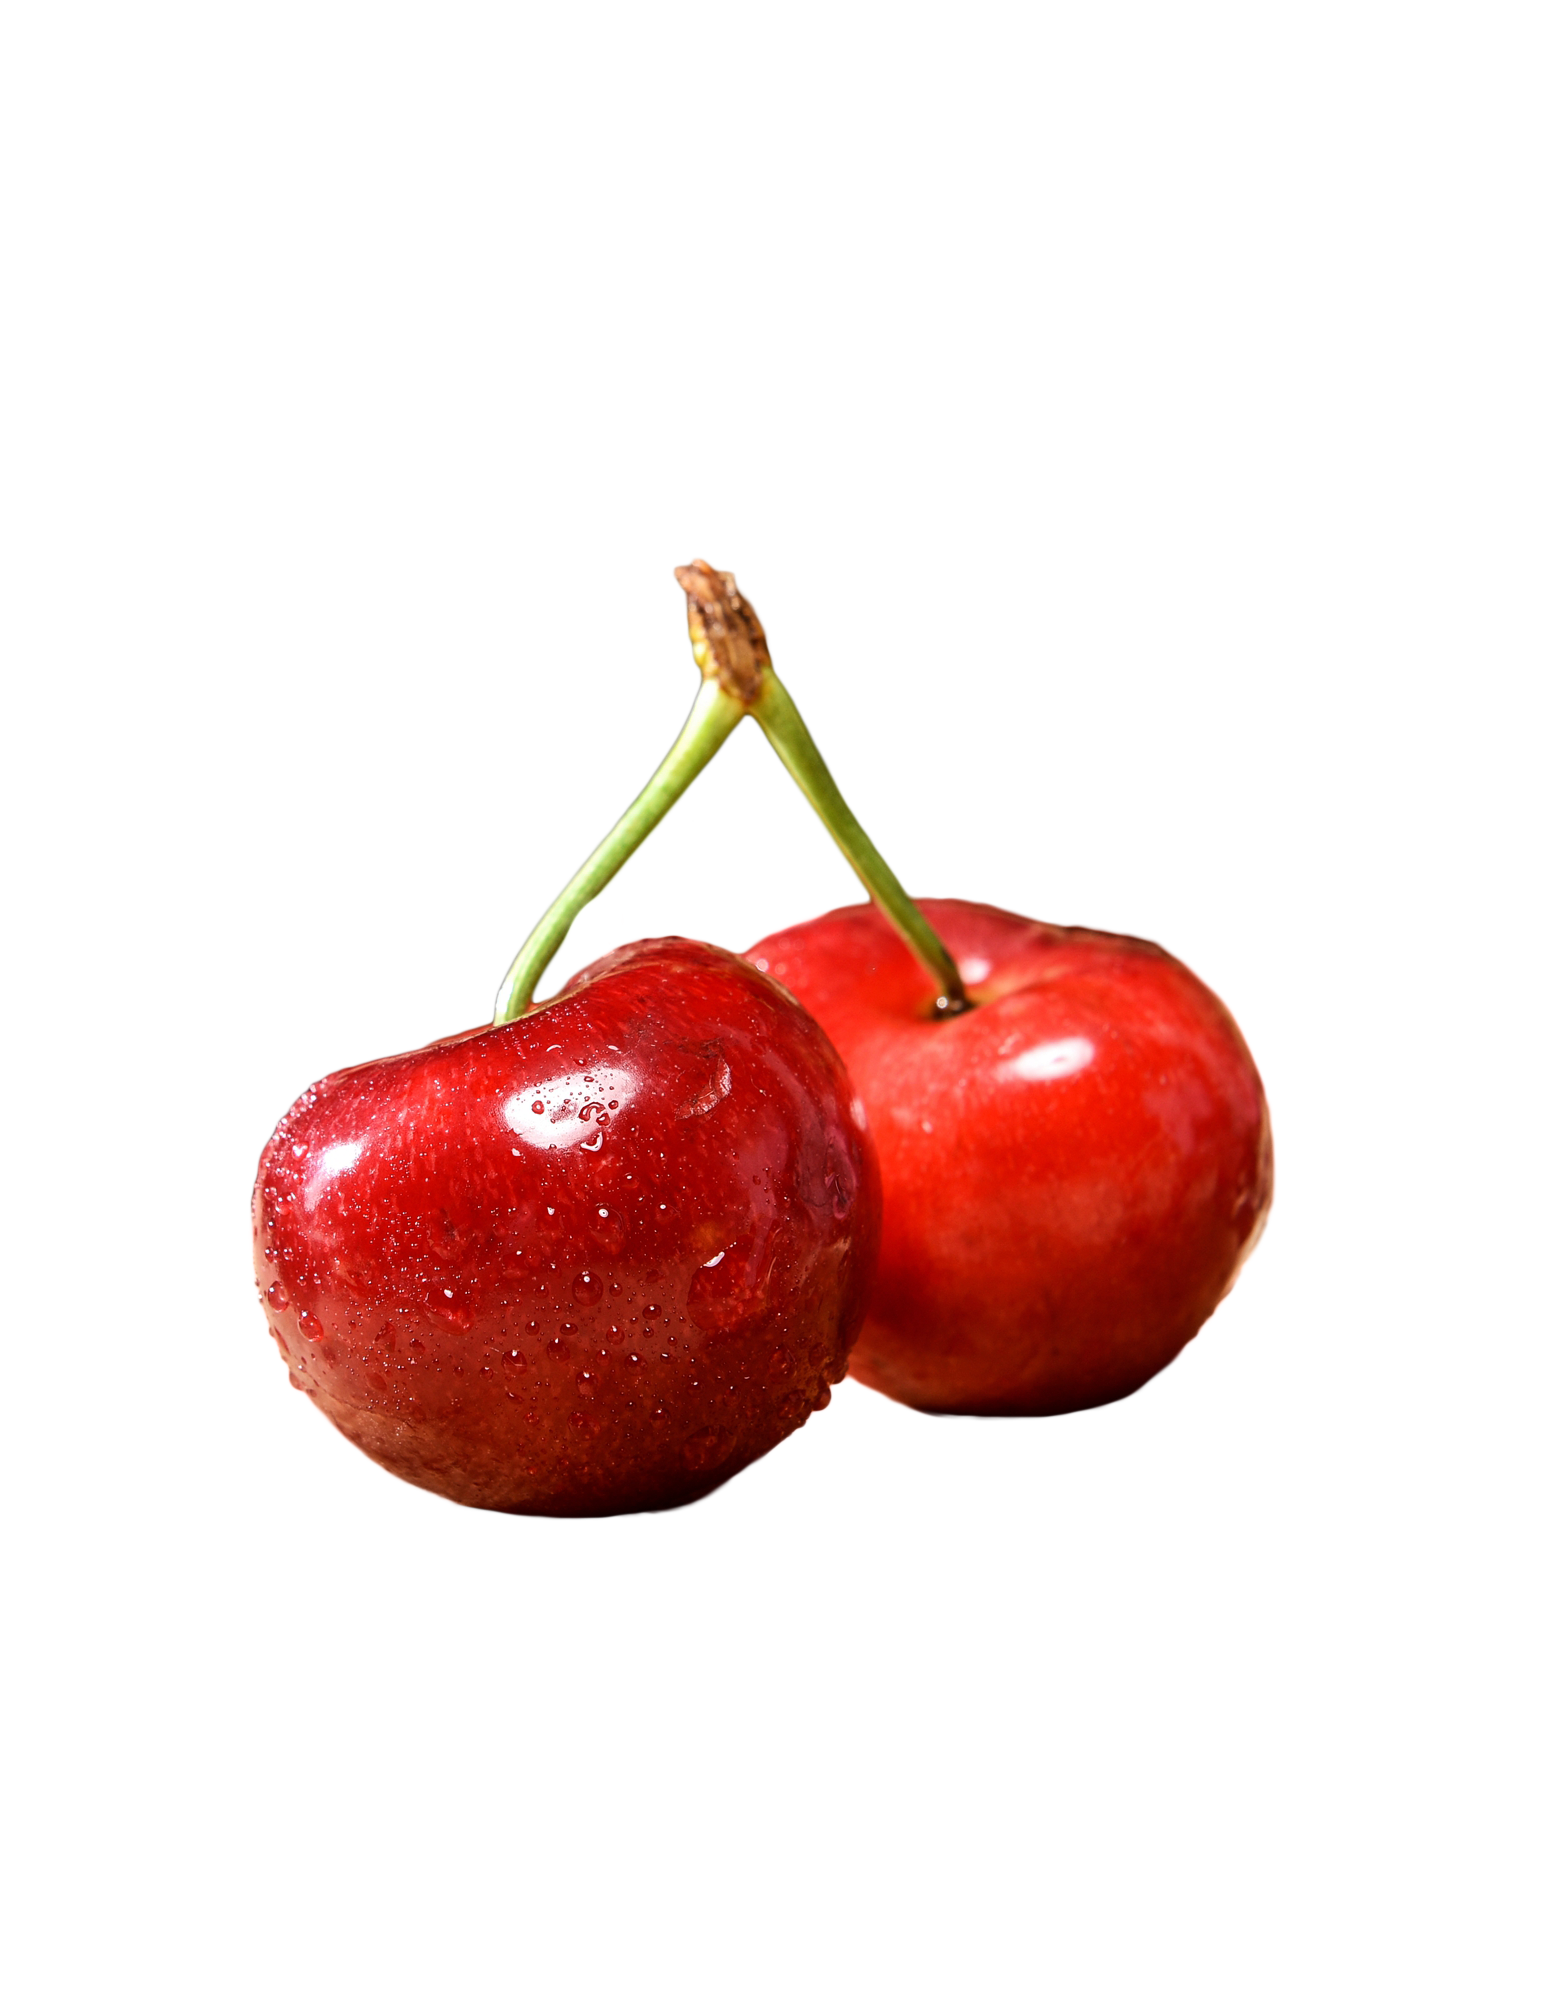 http://laboccajuice.ca/wp-content/uploads/2022/04/—Pngtree—cherries_5622655.png